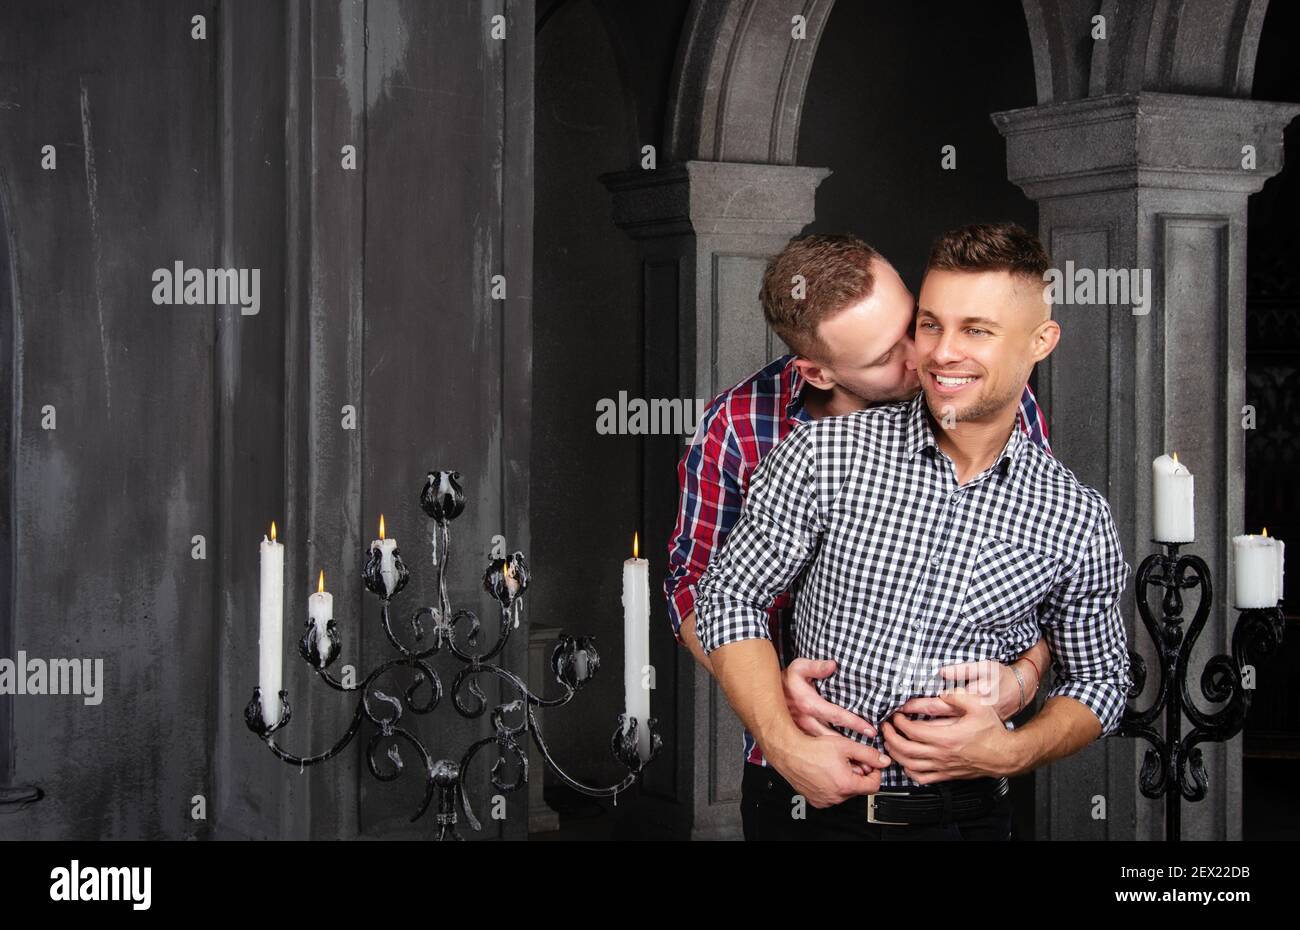 Young happy gay couple getting married in church. Love and romance. Handsome men in suits. Stock Photo